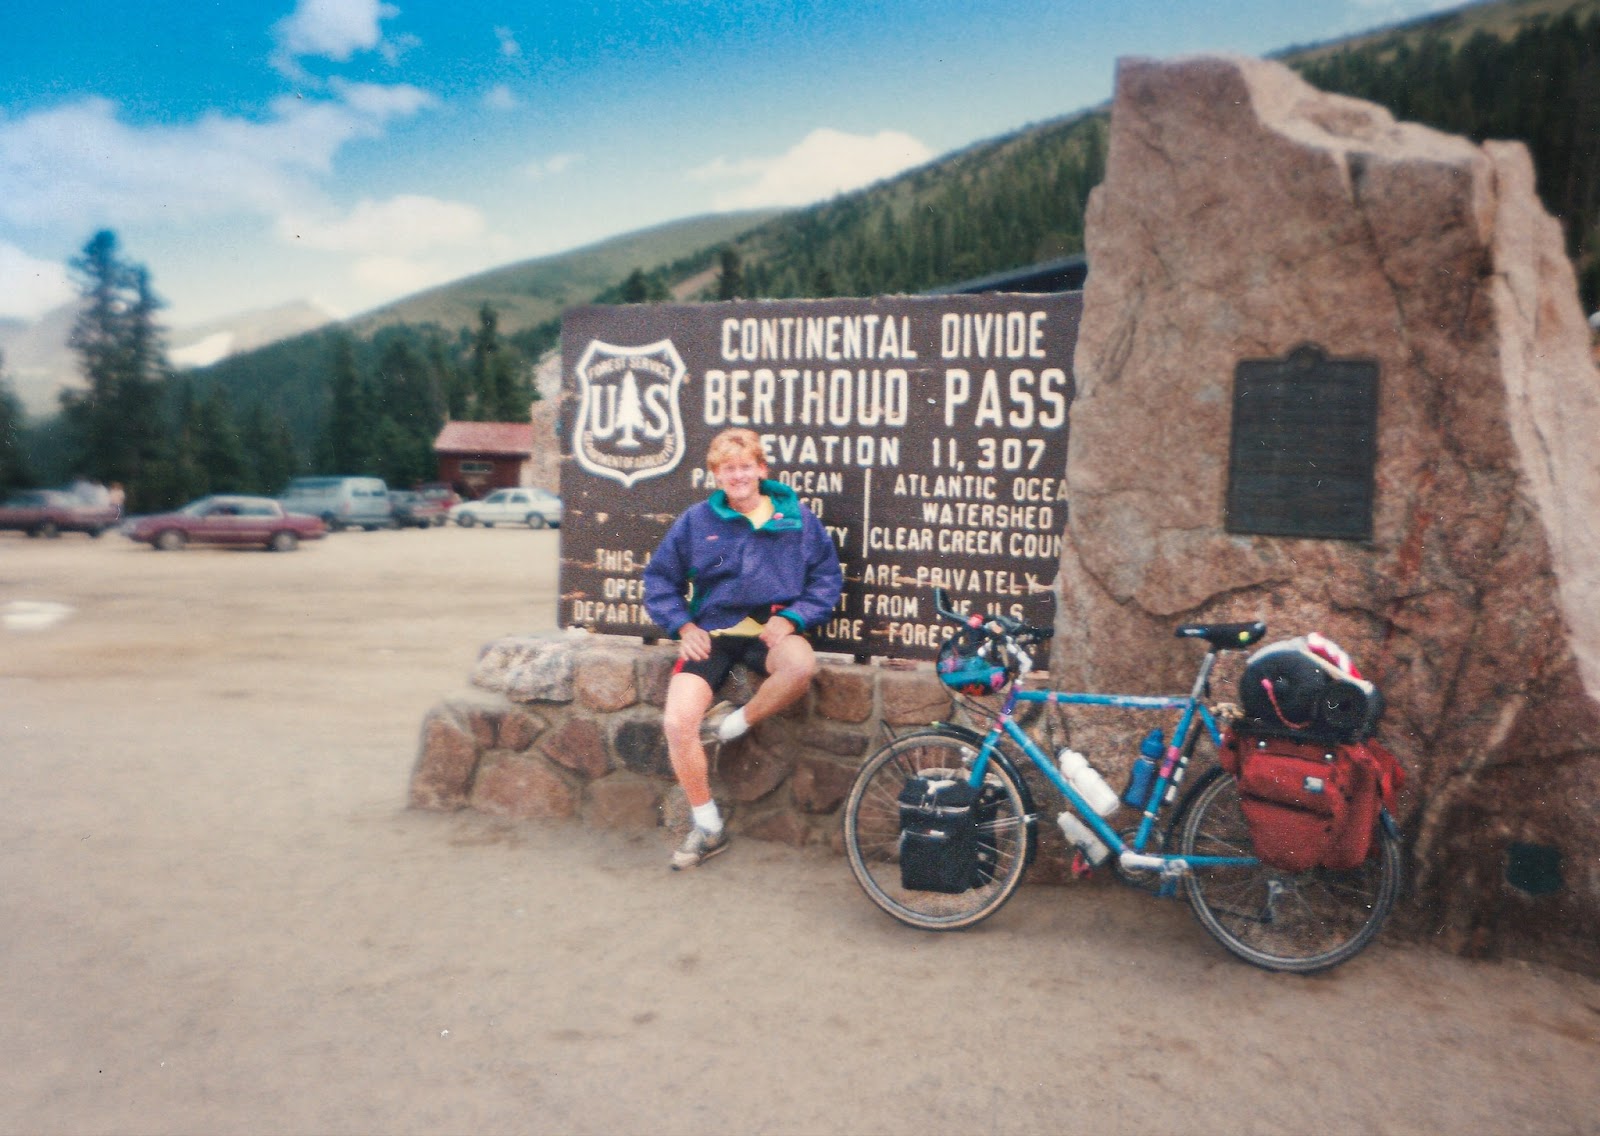 Bicycle and cyclist at the Continental Divide sign that says: Berthoud Pass Elevation 11,307